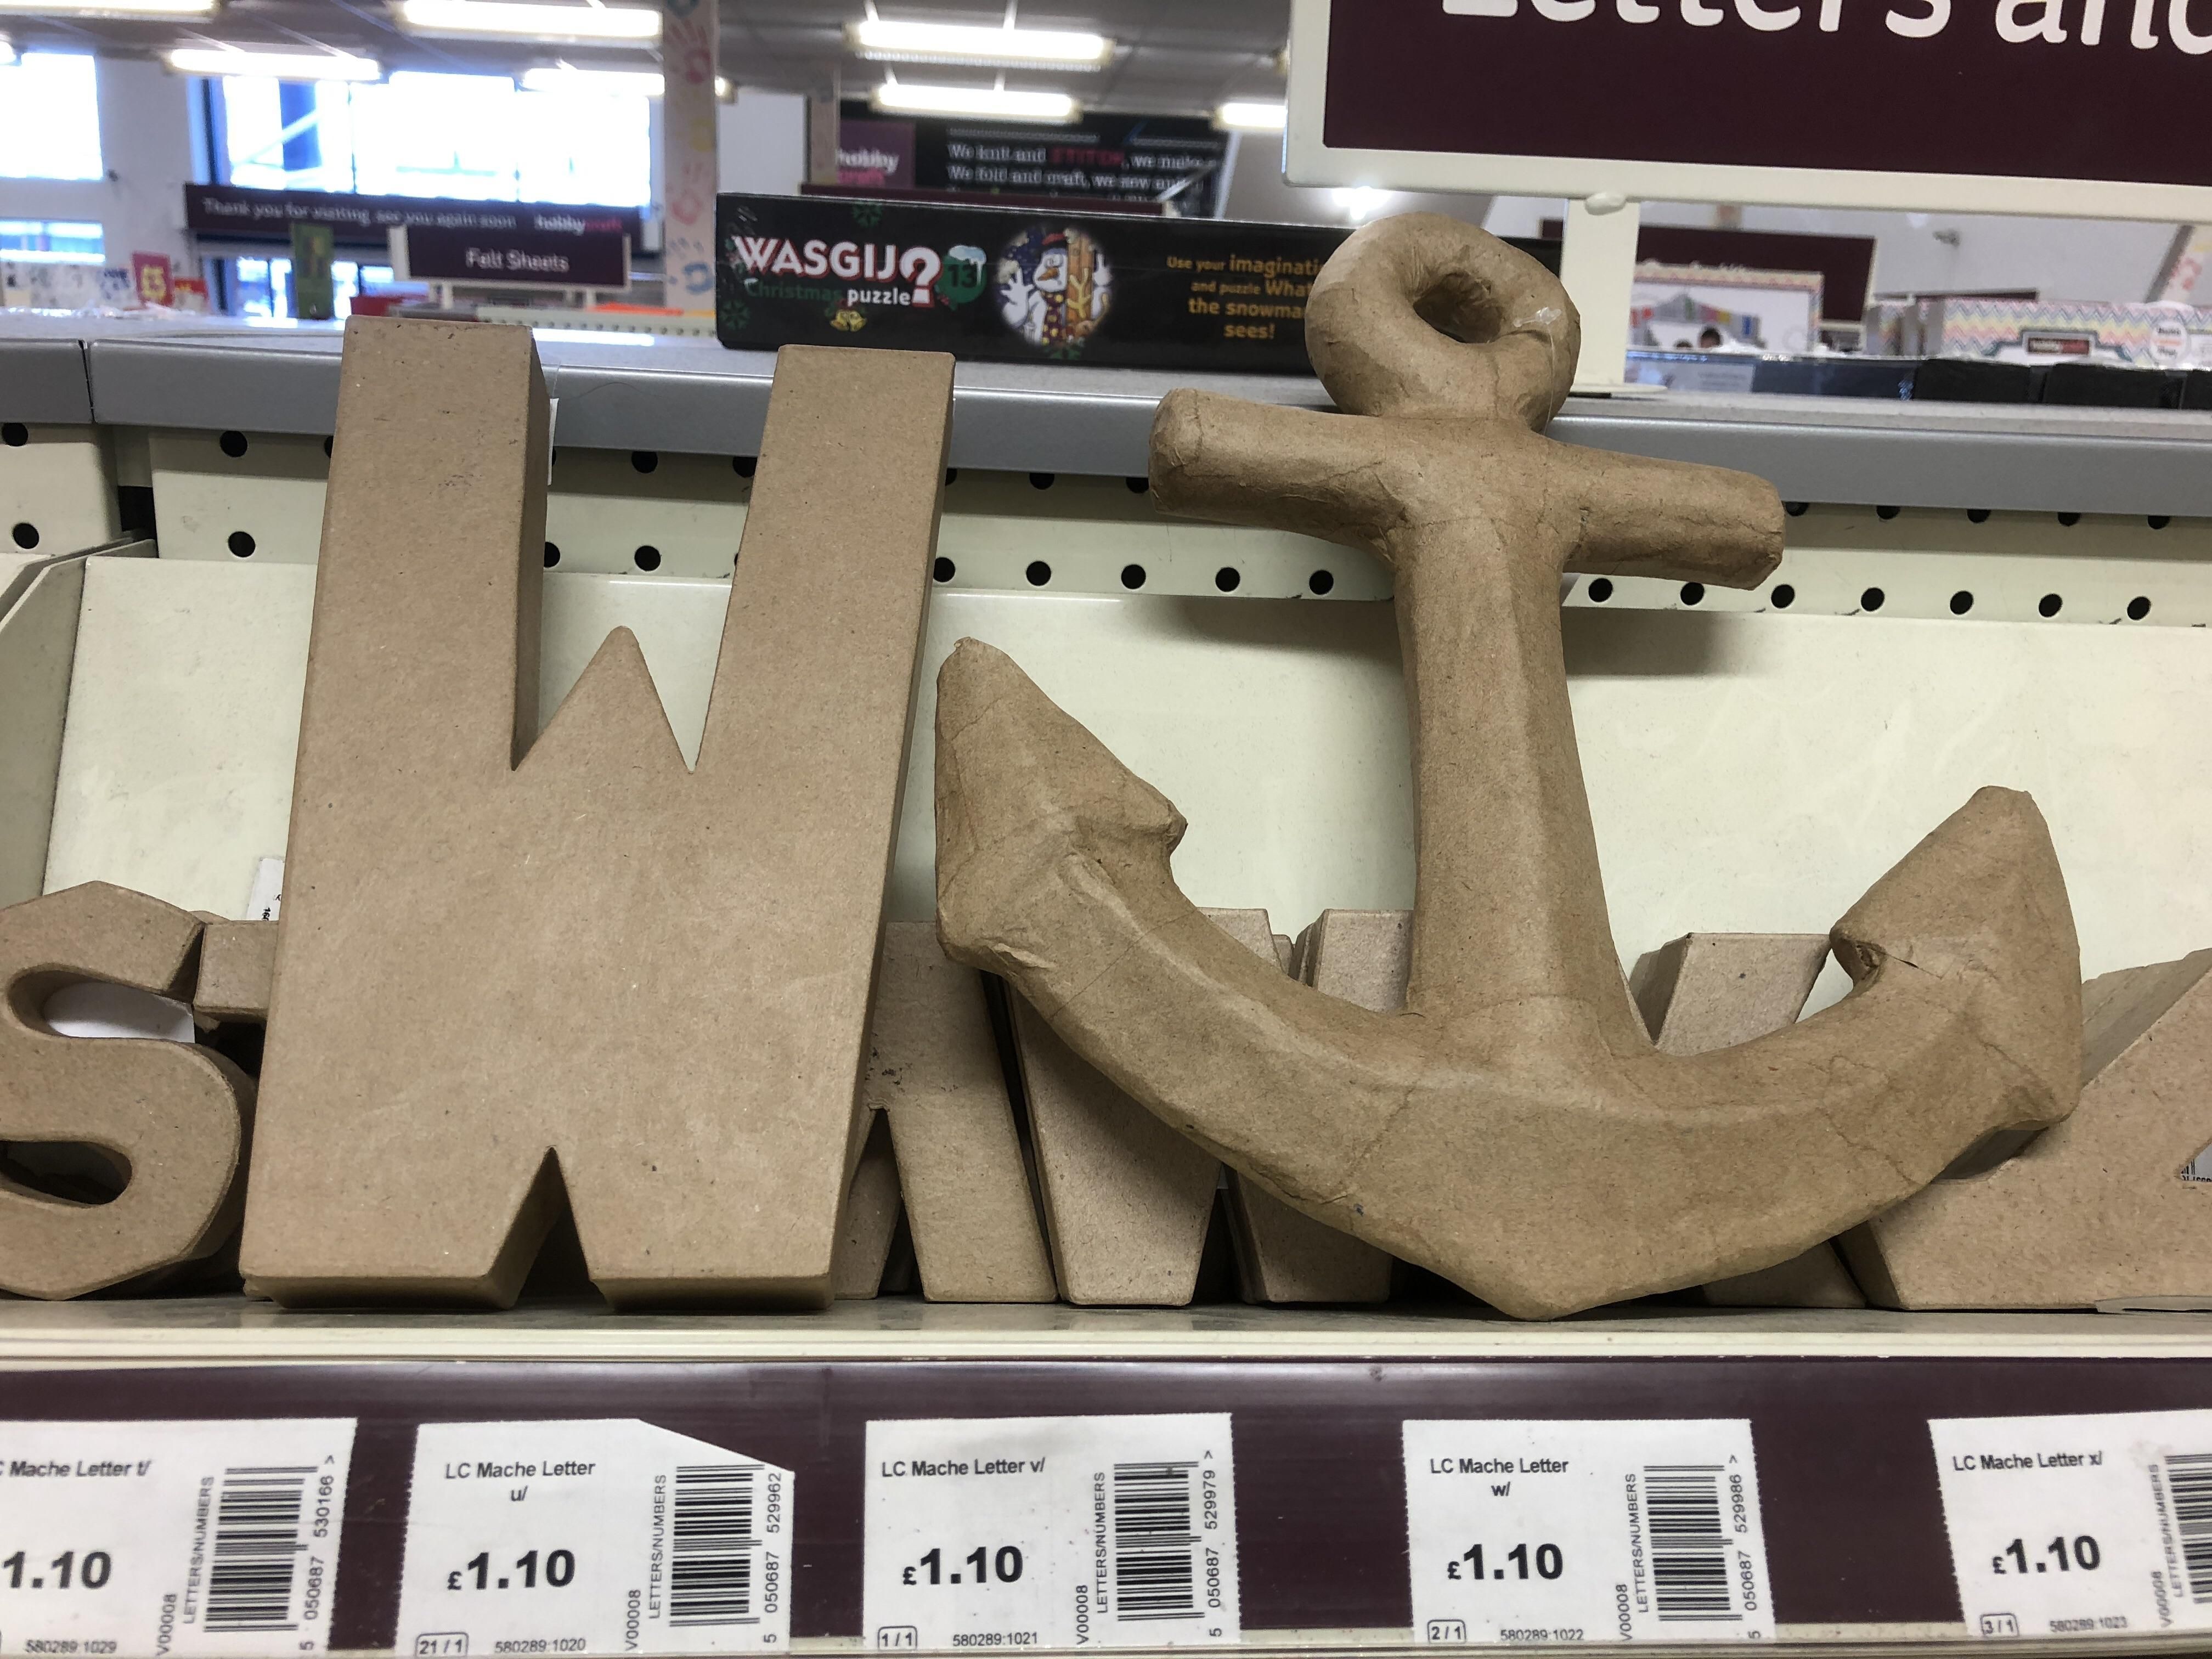 Bored walking around Hobbycraft with my girlfriend and did the most British thing possible...She thought I was immature but I think I’m hilarious!